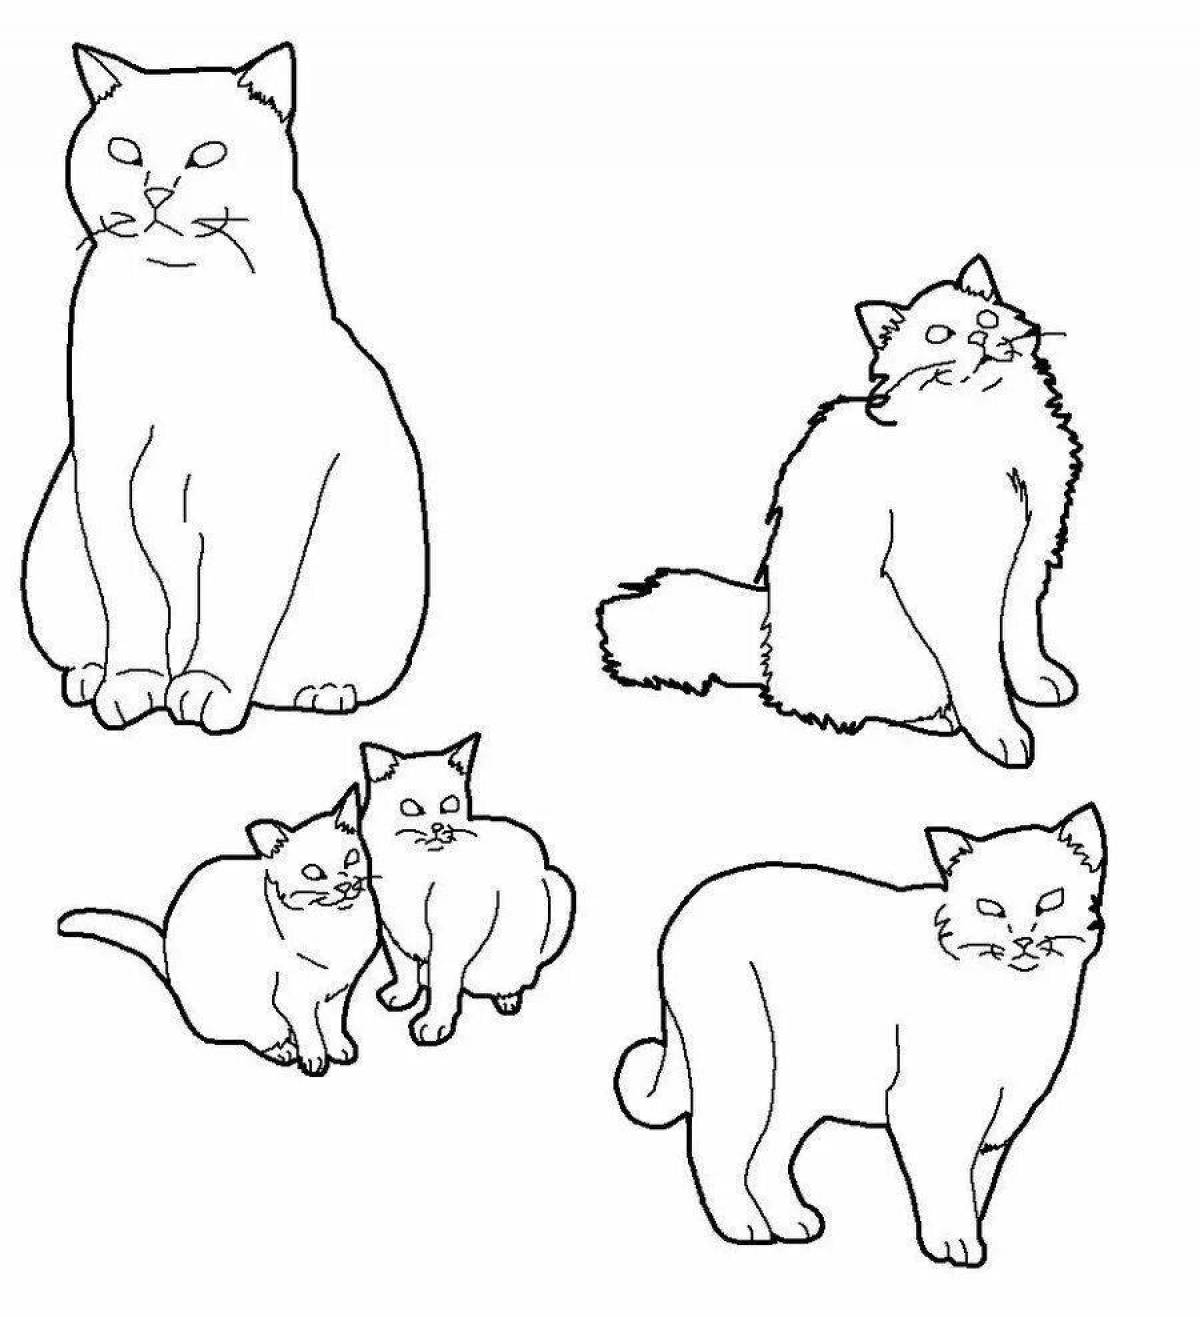 Fancy British cat coloring page